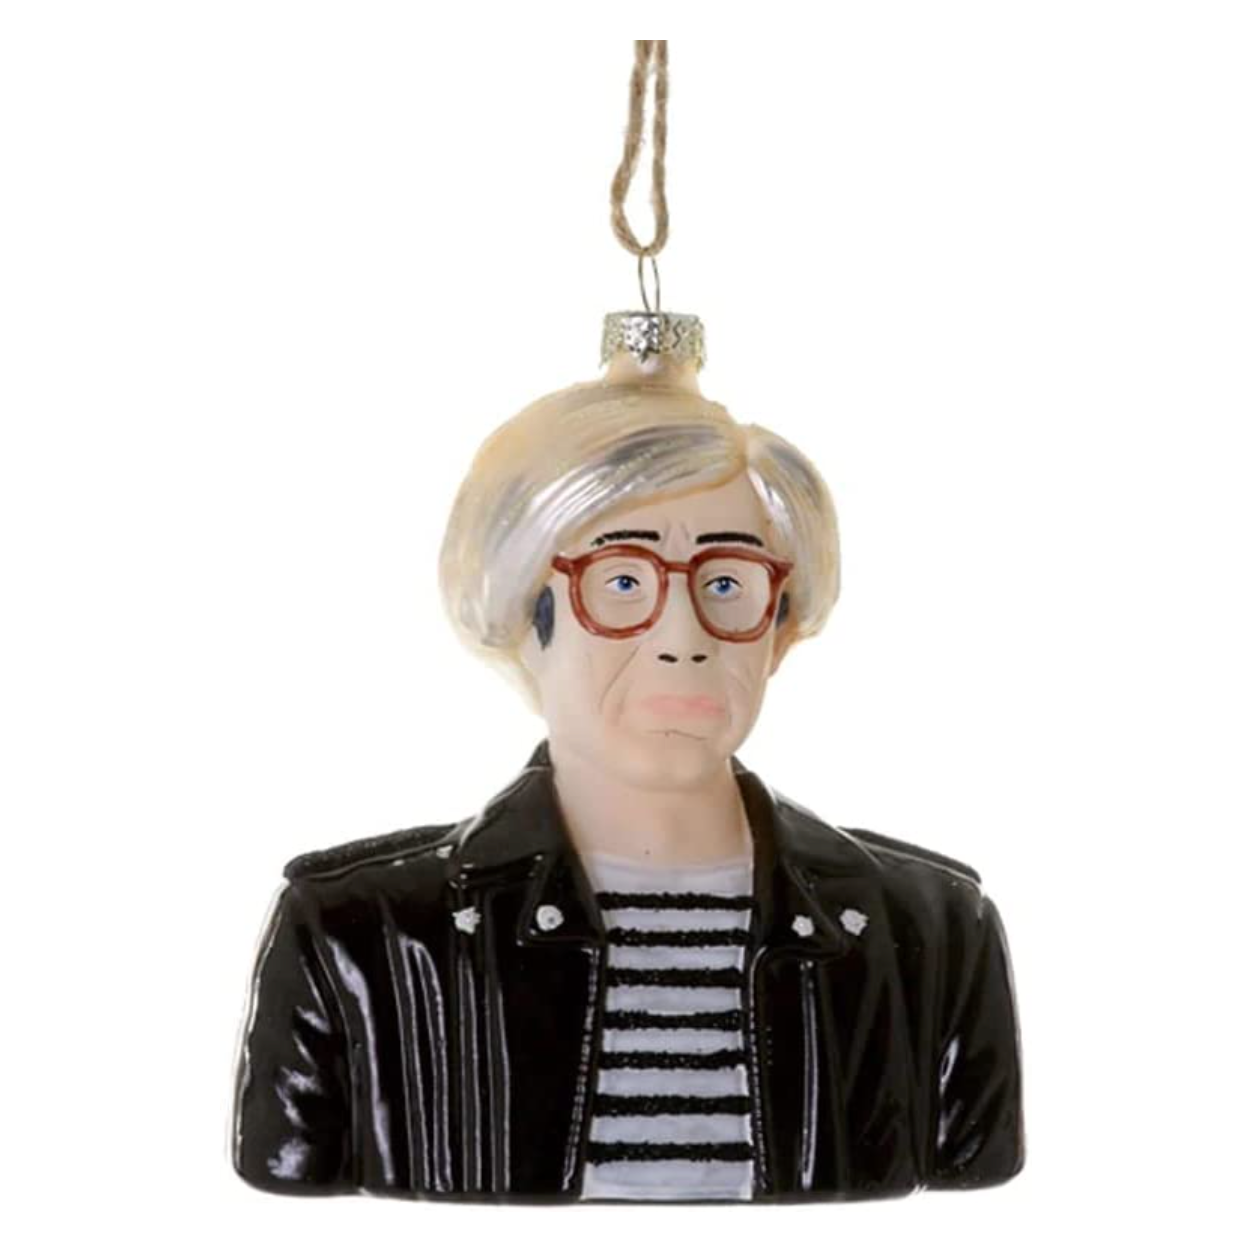 Holiday Ornament of artist Andy Warhol - available from Scout House.